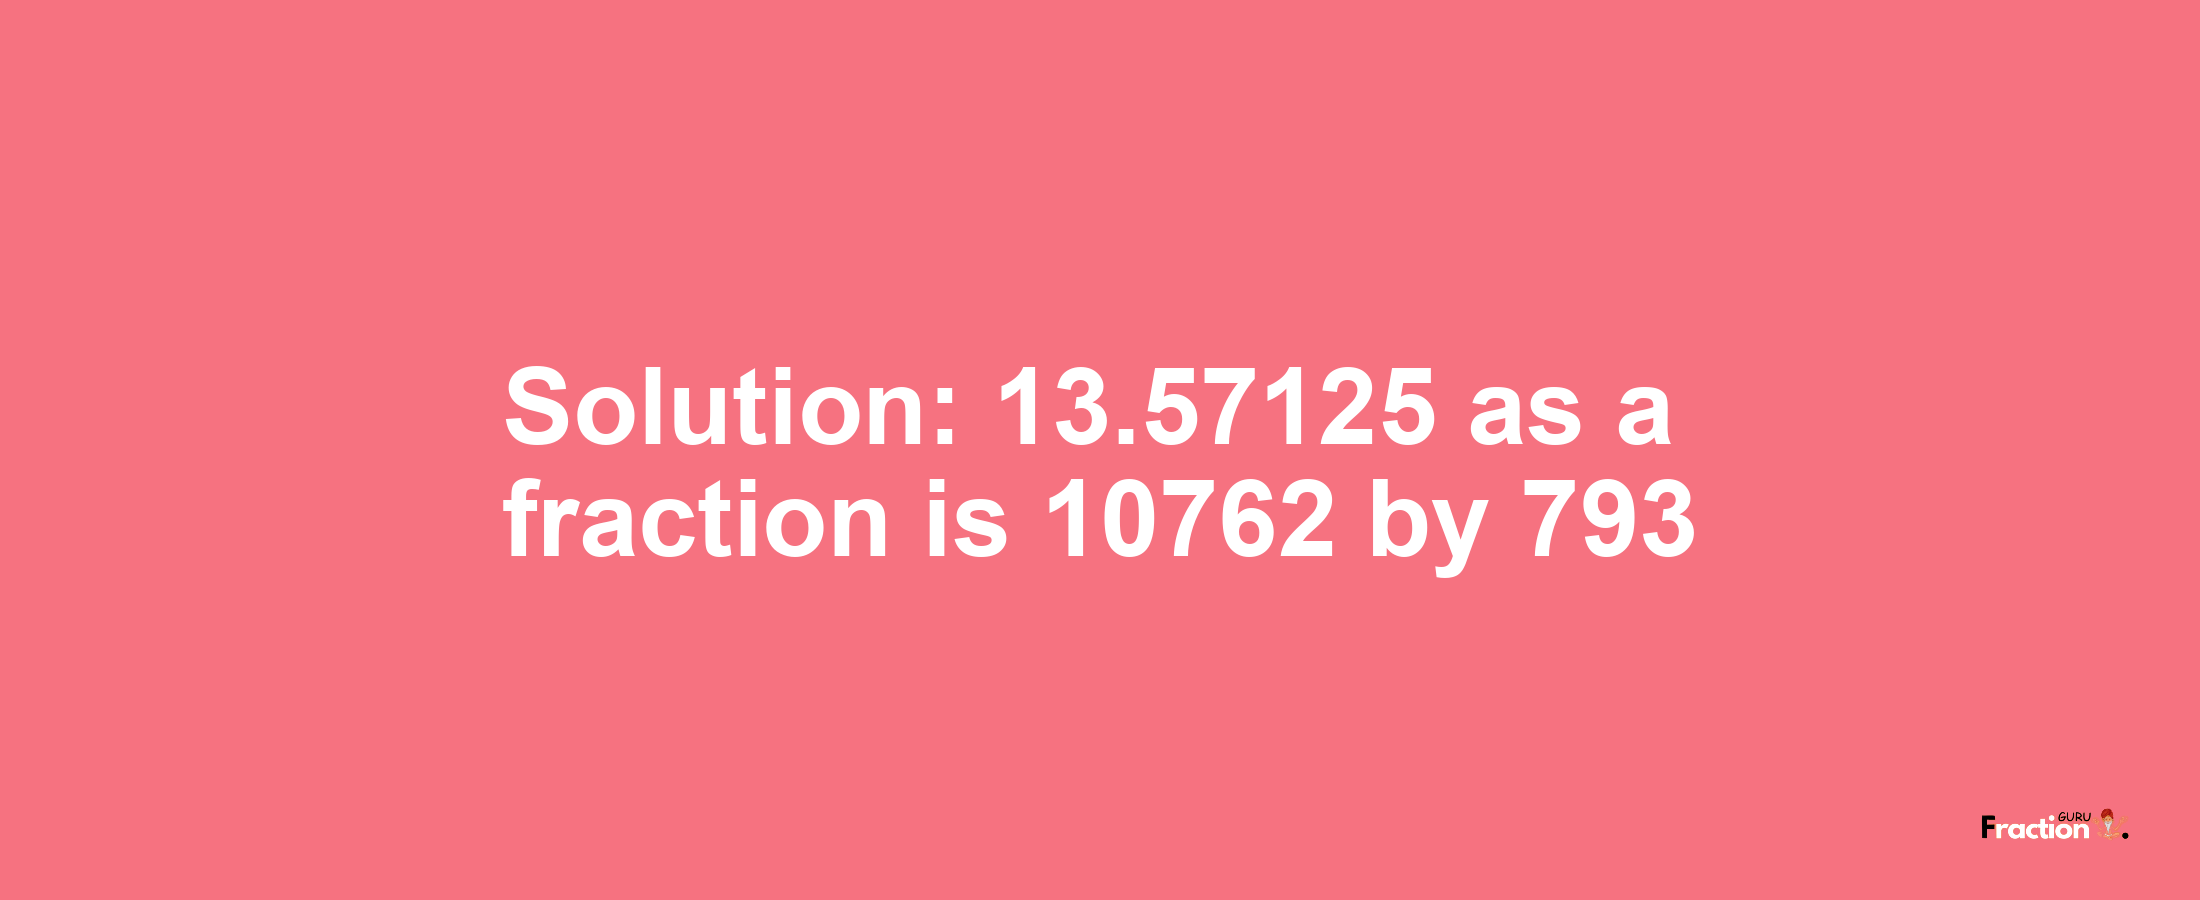 Solution:13.57125 as a fraction is 10762/793